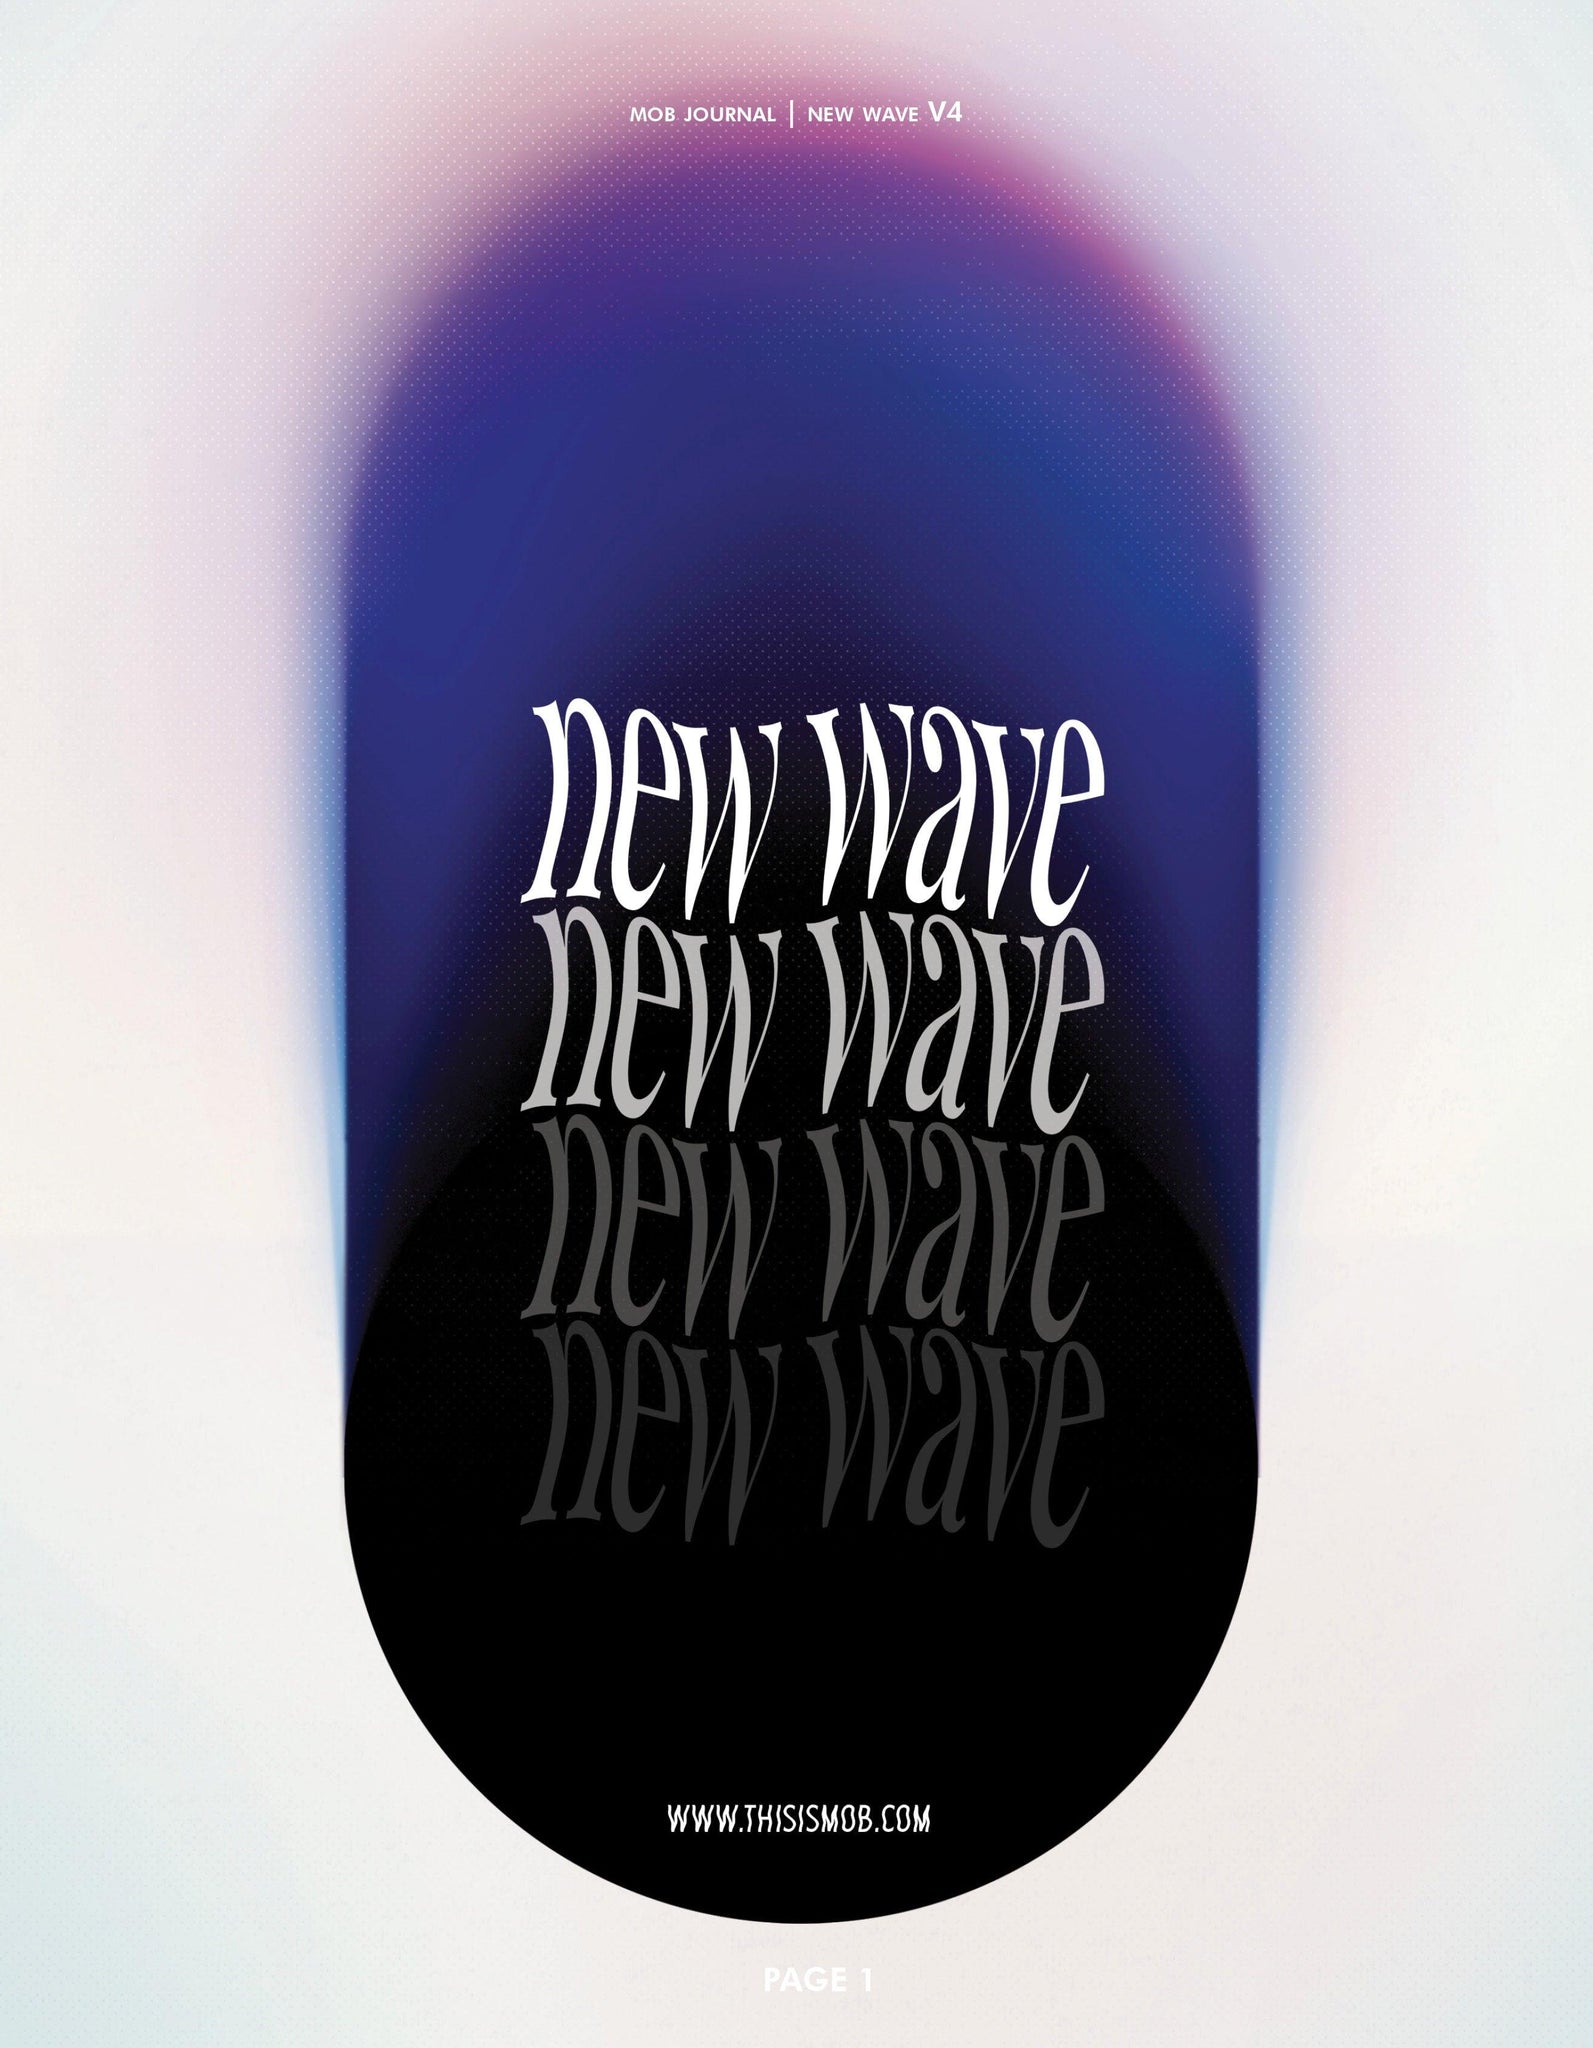 NEW WAVE | VOLUME FOUR | ISSUE #05 - Mob Journal